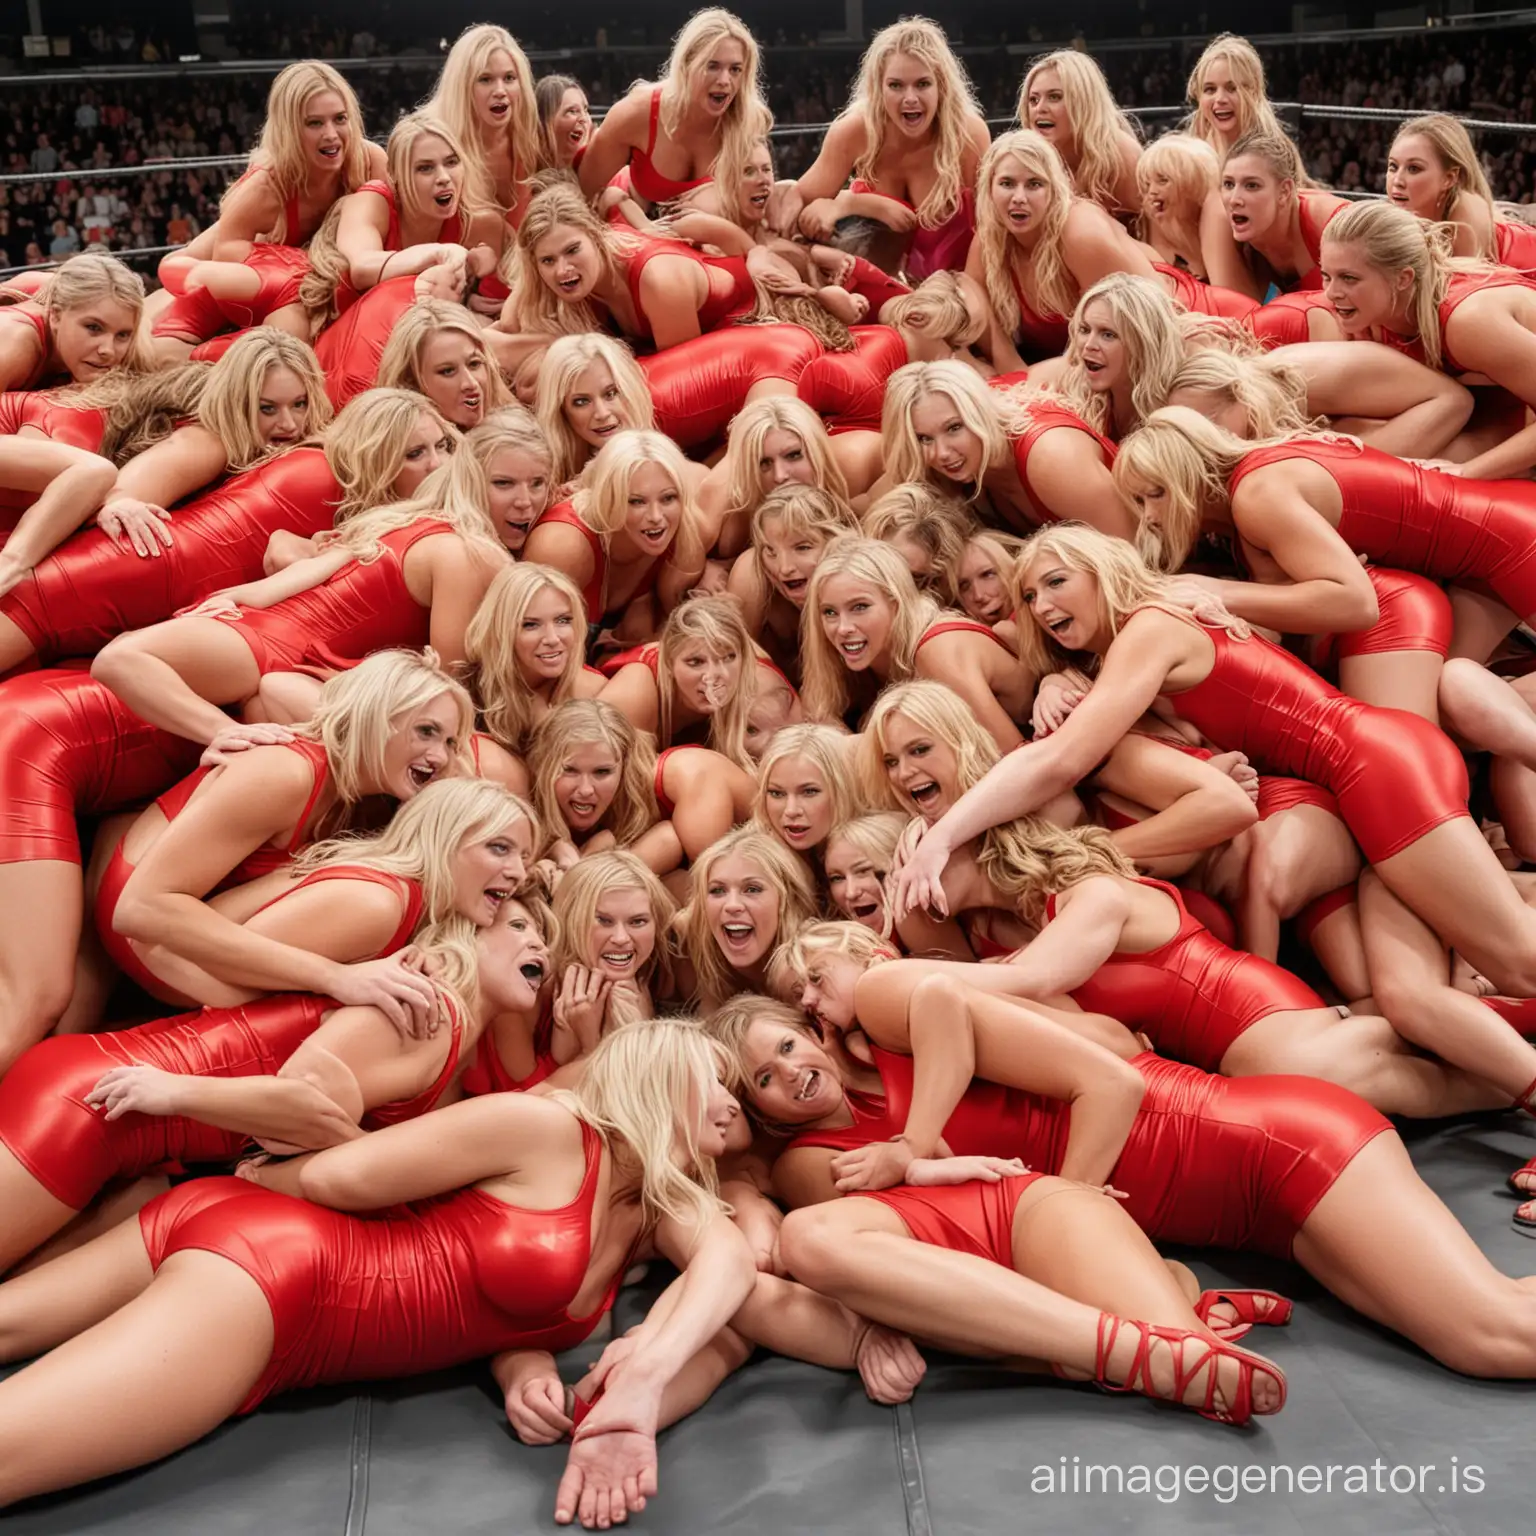 Blonde-Women-Wrestling-in-Red-Bodycon-Dresses-Exciting-Wrestling-Match-in-a-Vibrant-Arena